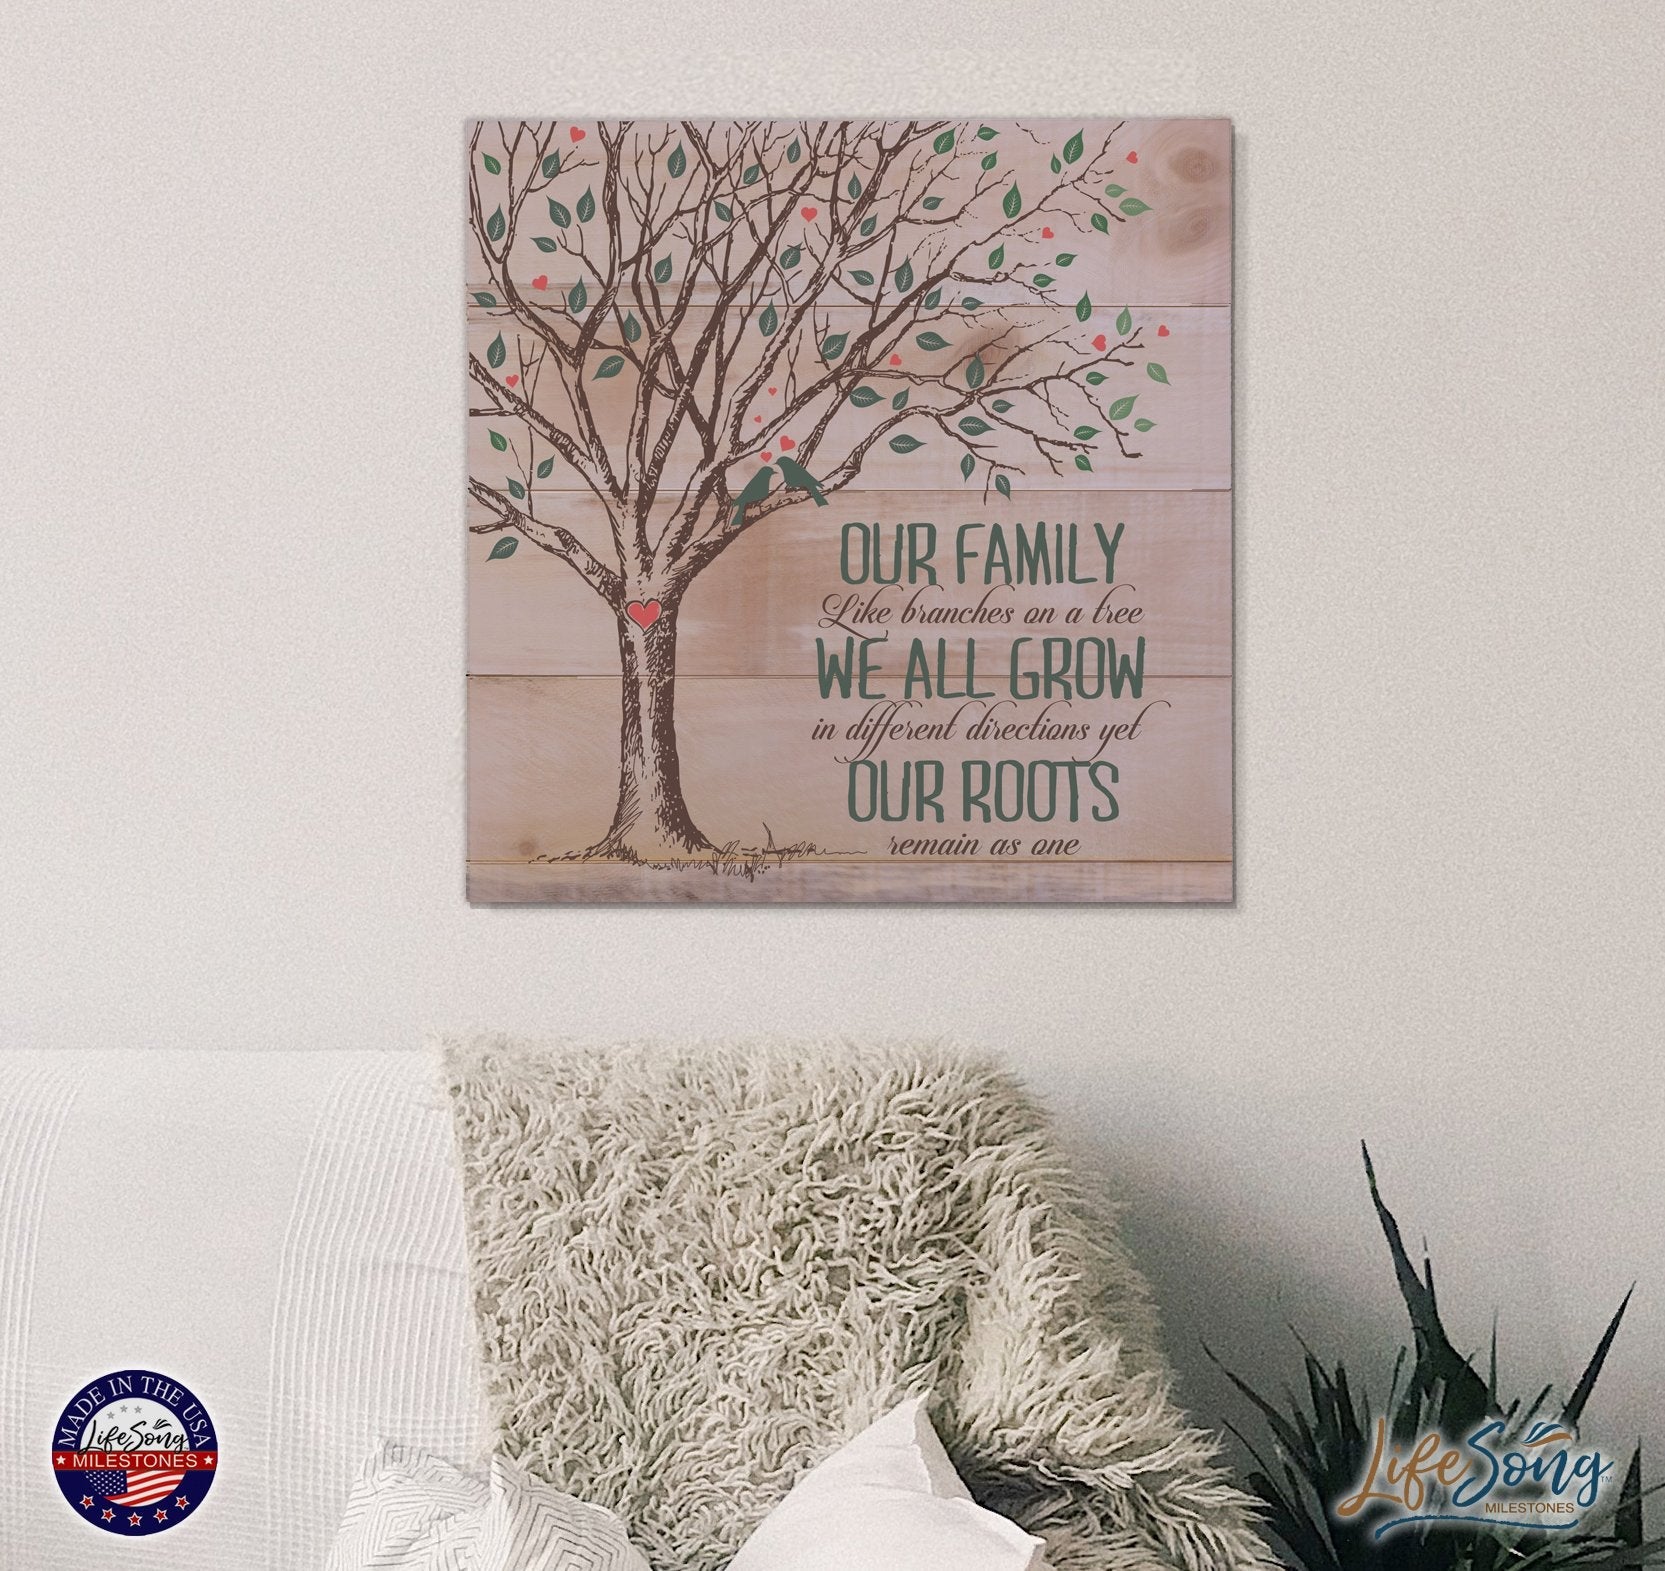 Pallet Art Family Home Decor Wall Plaque - Our Family - LifeSong Milestones